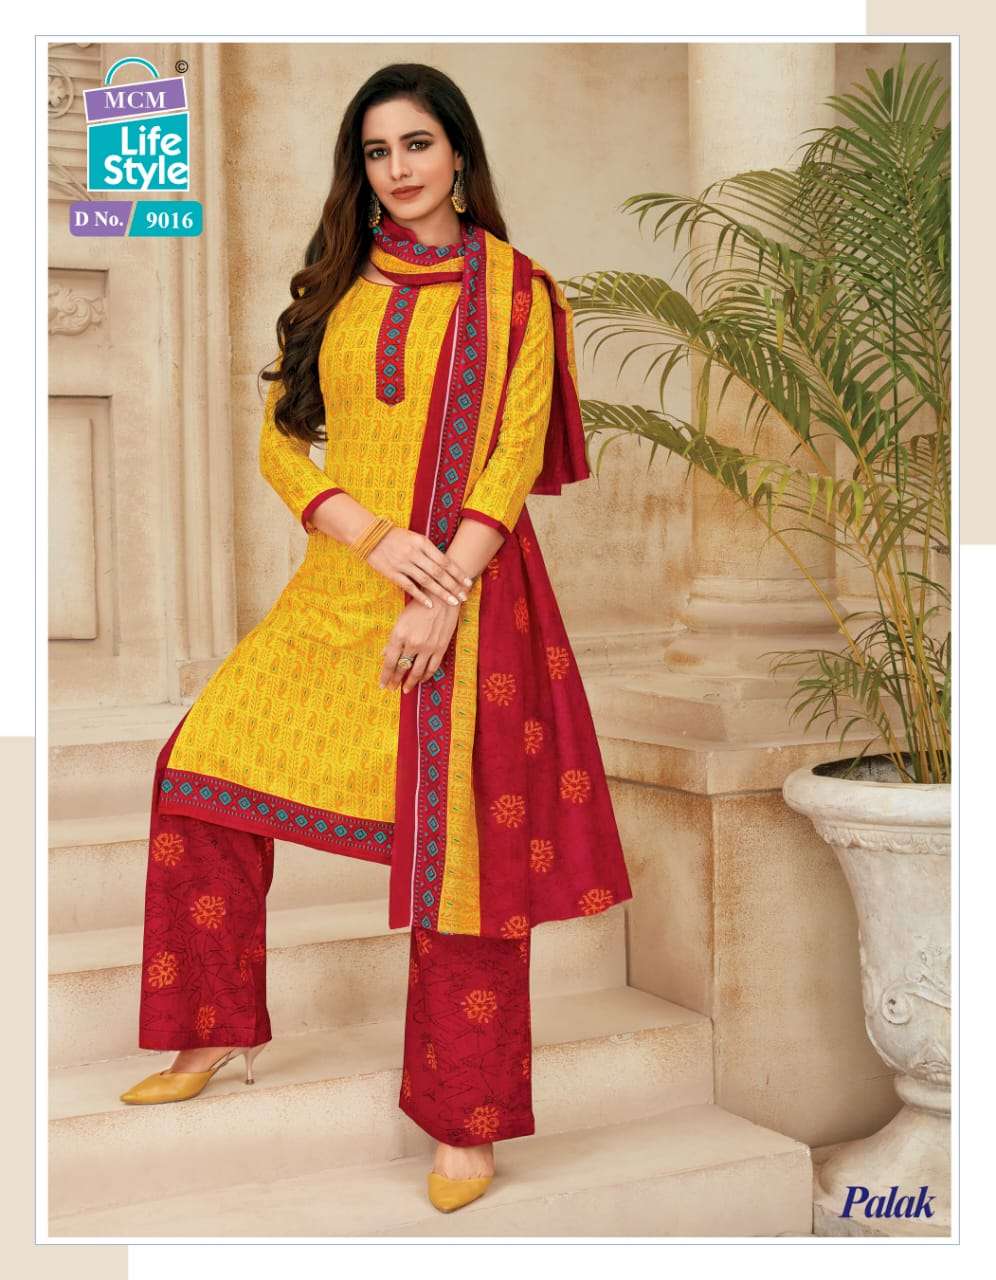 PALAK BY MCM LIFESTYLE 9000 TO 9031 SERIES BEAUTIFUL SUITS COLORFUL STYLISH FANCY CASUAL WEAR & ETHNIC WEAR FANCY DRESSES AT WHOLESALE PRICE